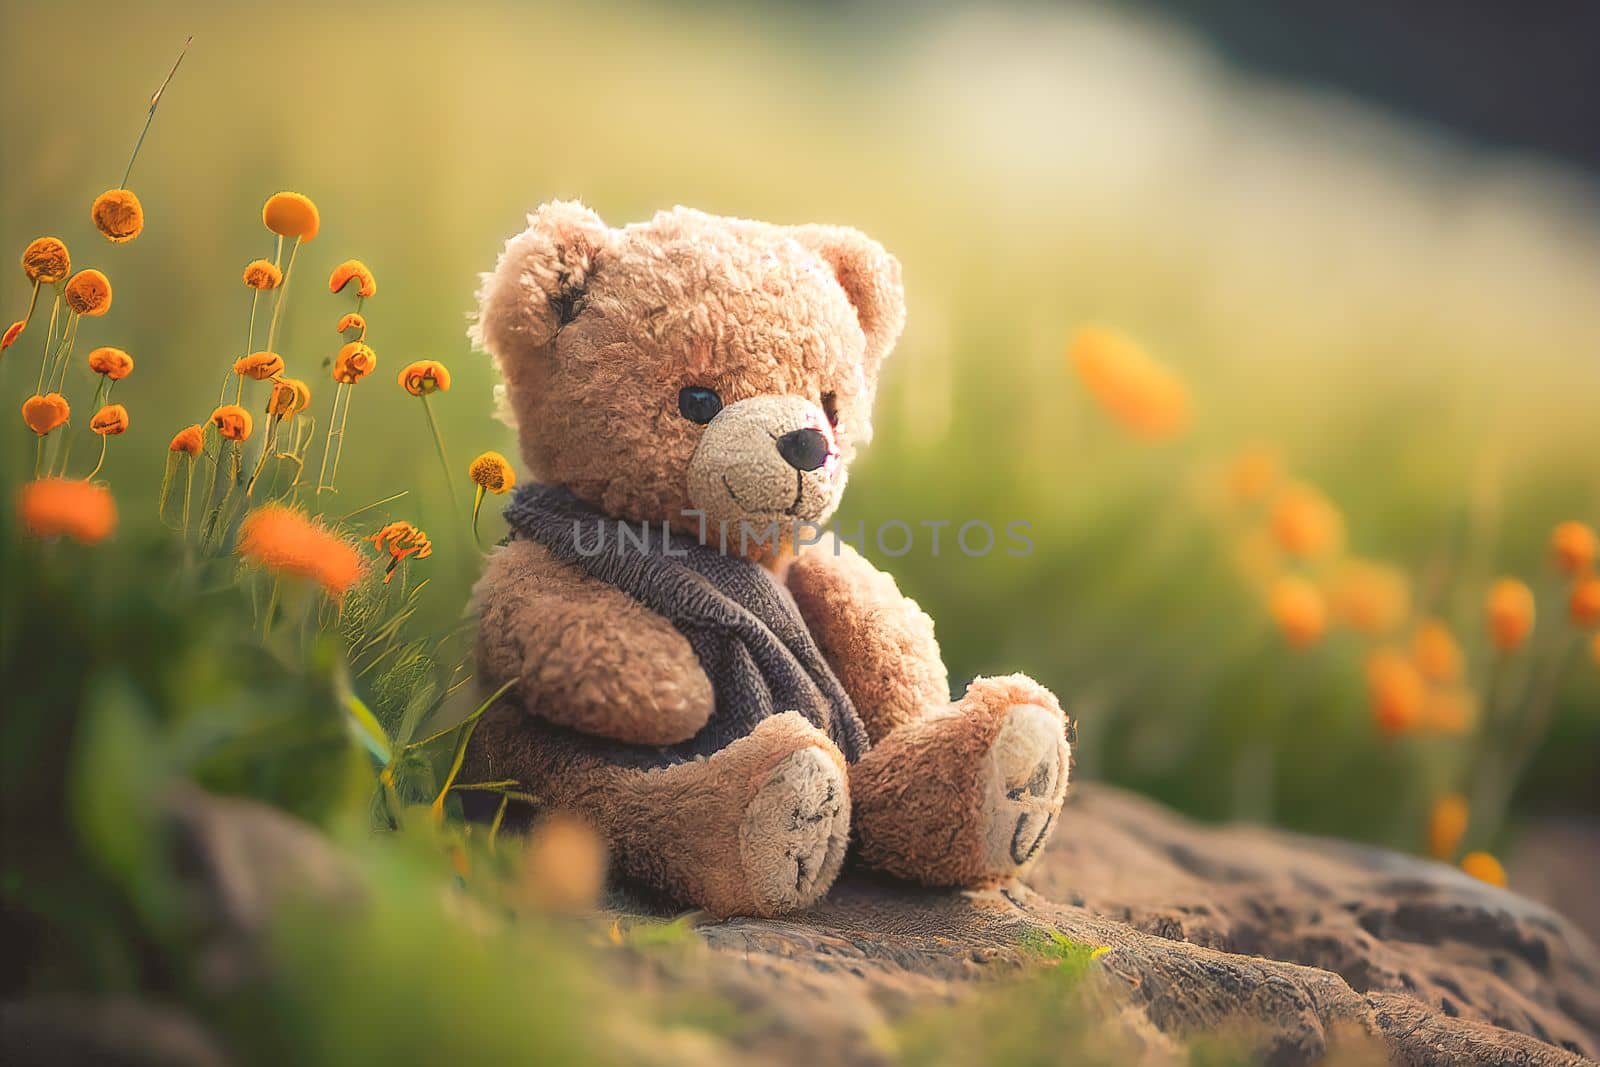 Small brown teddy bear sitting among a colorful flower garden. by FokasuArt